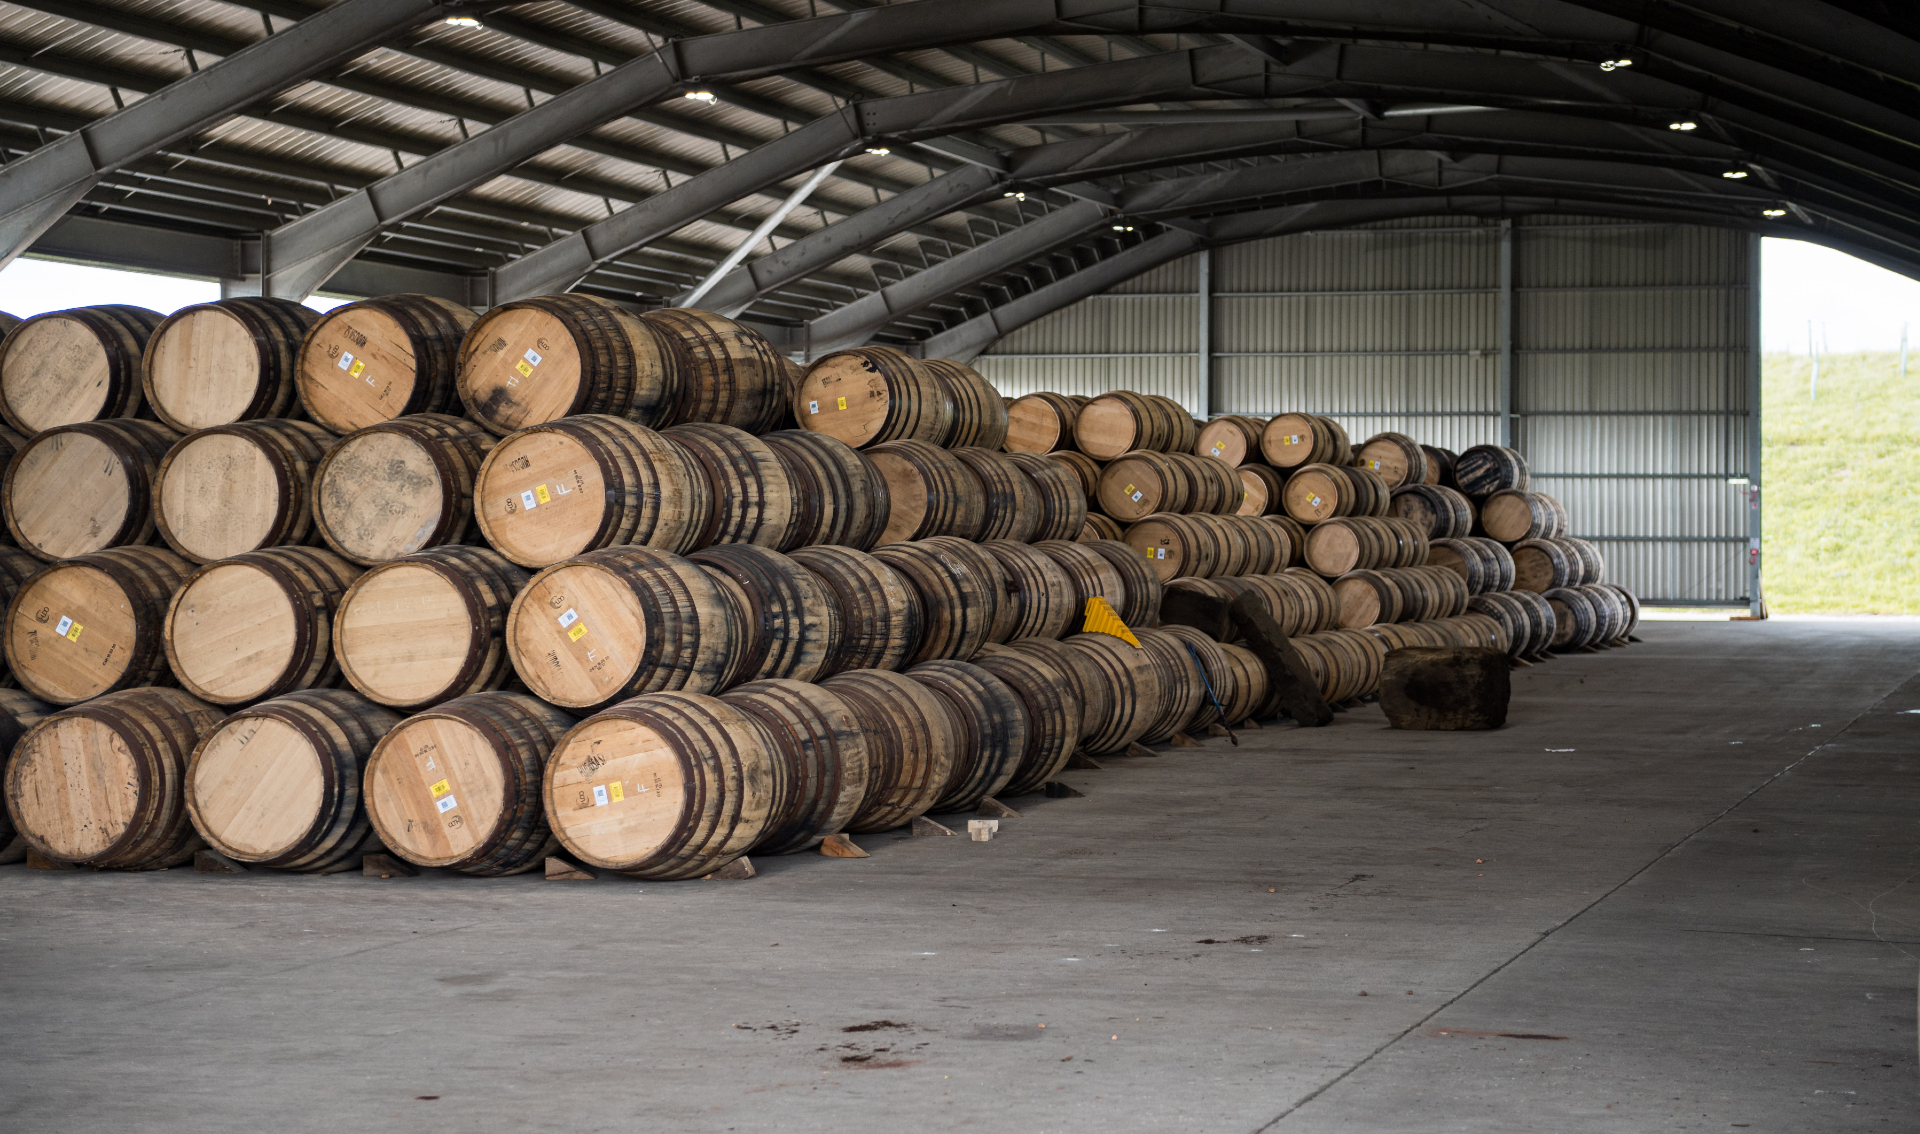 We have continued to invest in our production capabilities, with a particular focus on our sherry-seasoned oak casks.